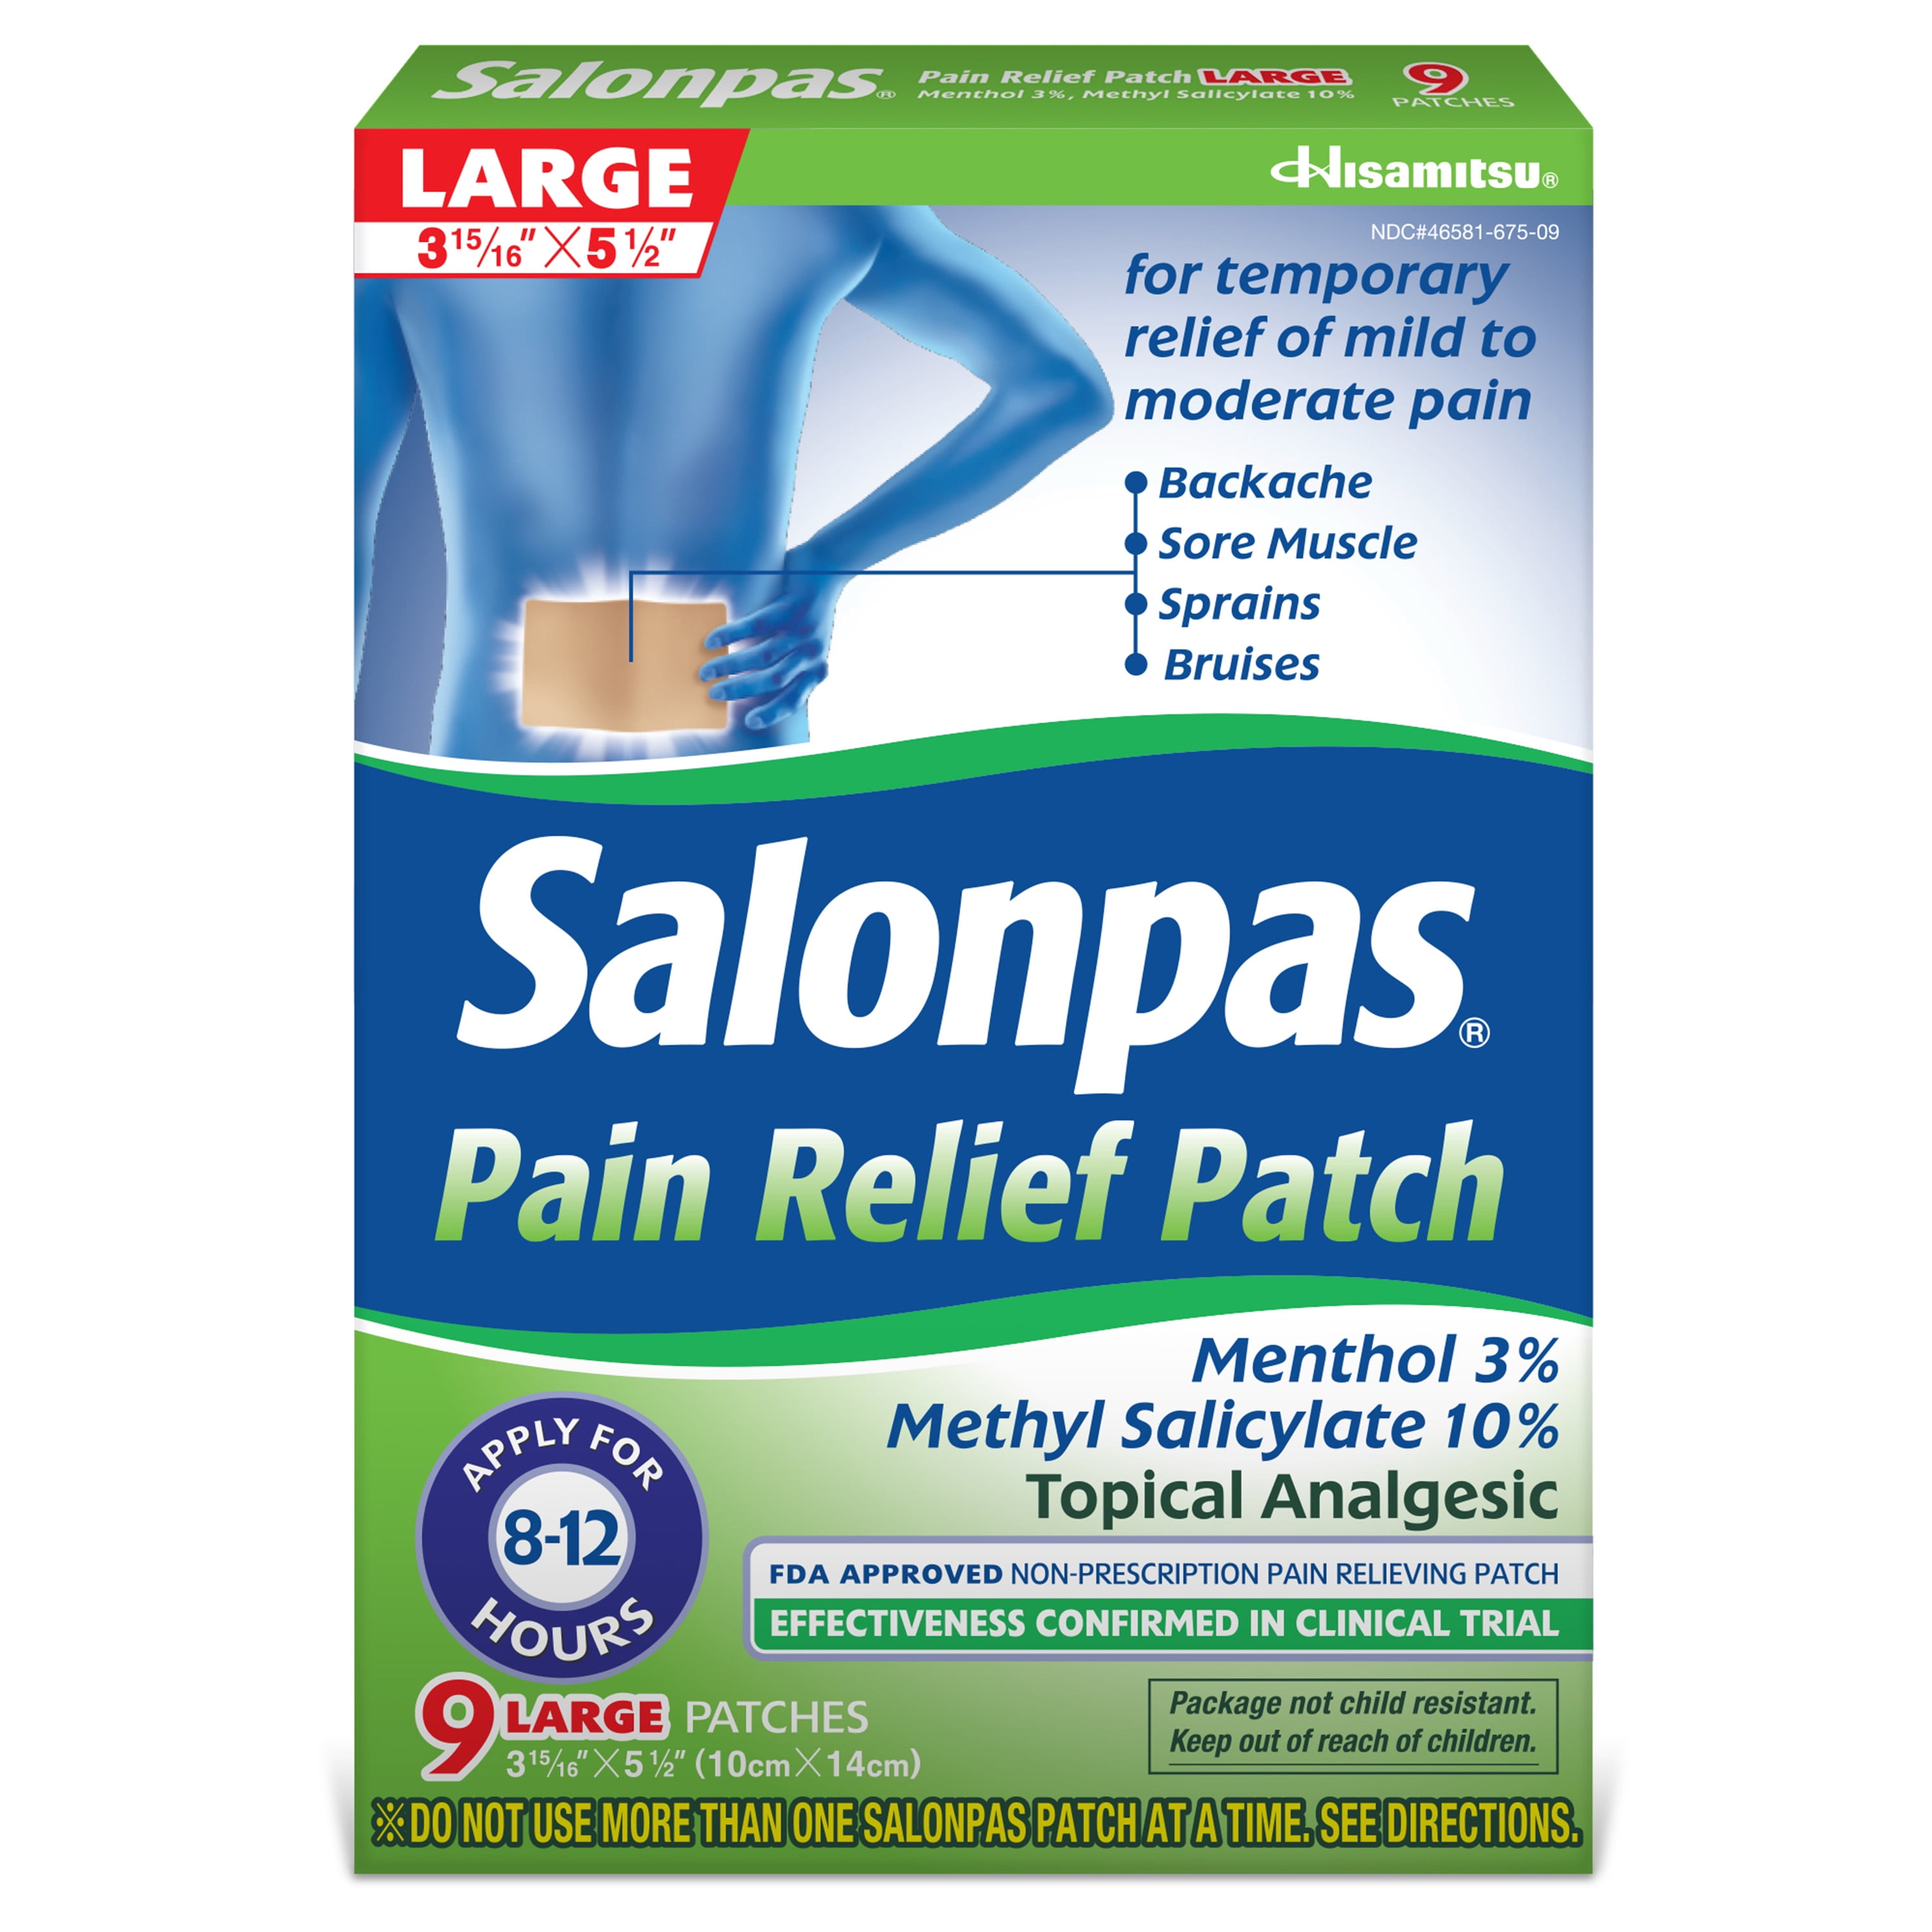 Salonpas Pain Relief Patch, 12-Hour Mild to Moderate Pain Relief, 9 Large Patches